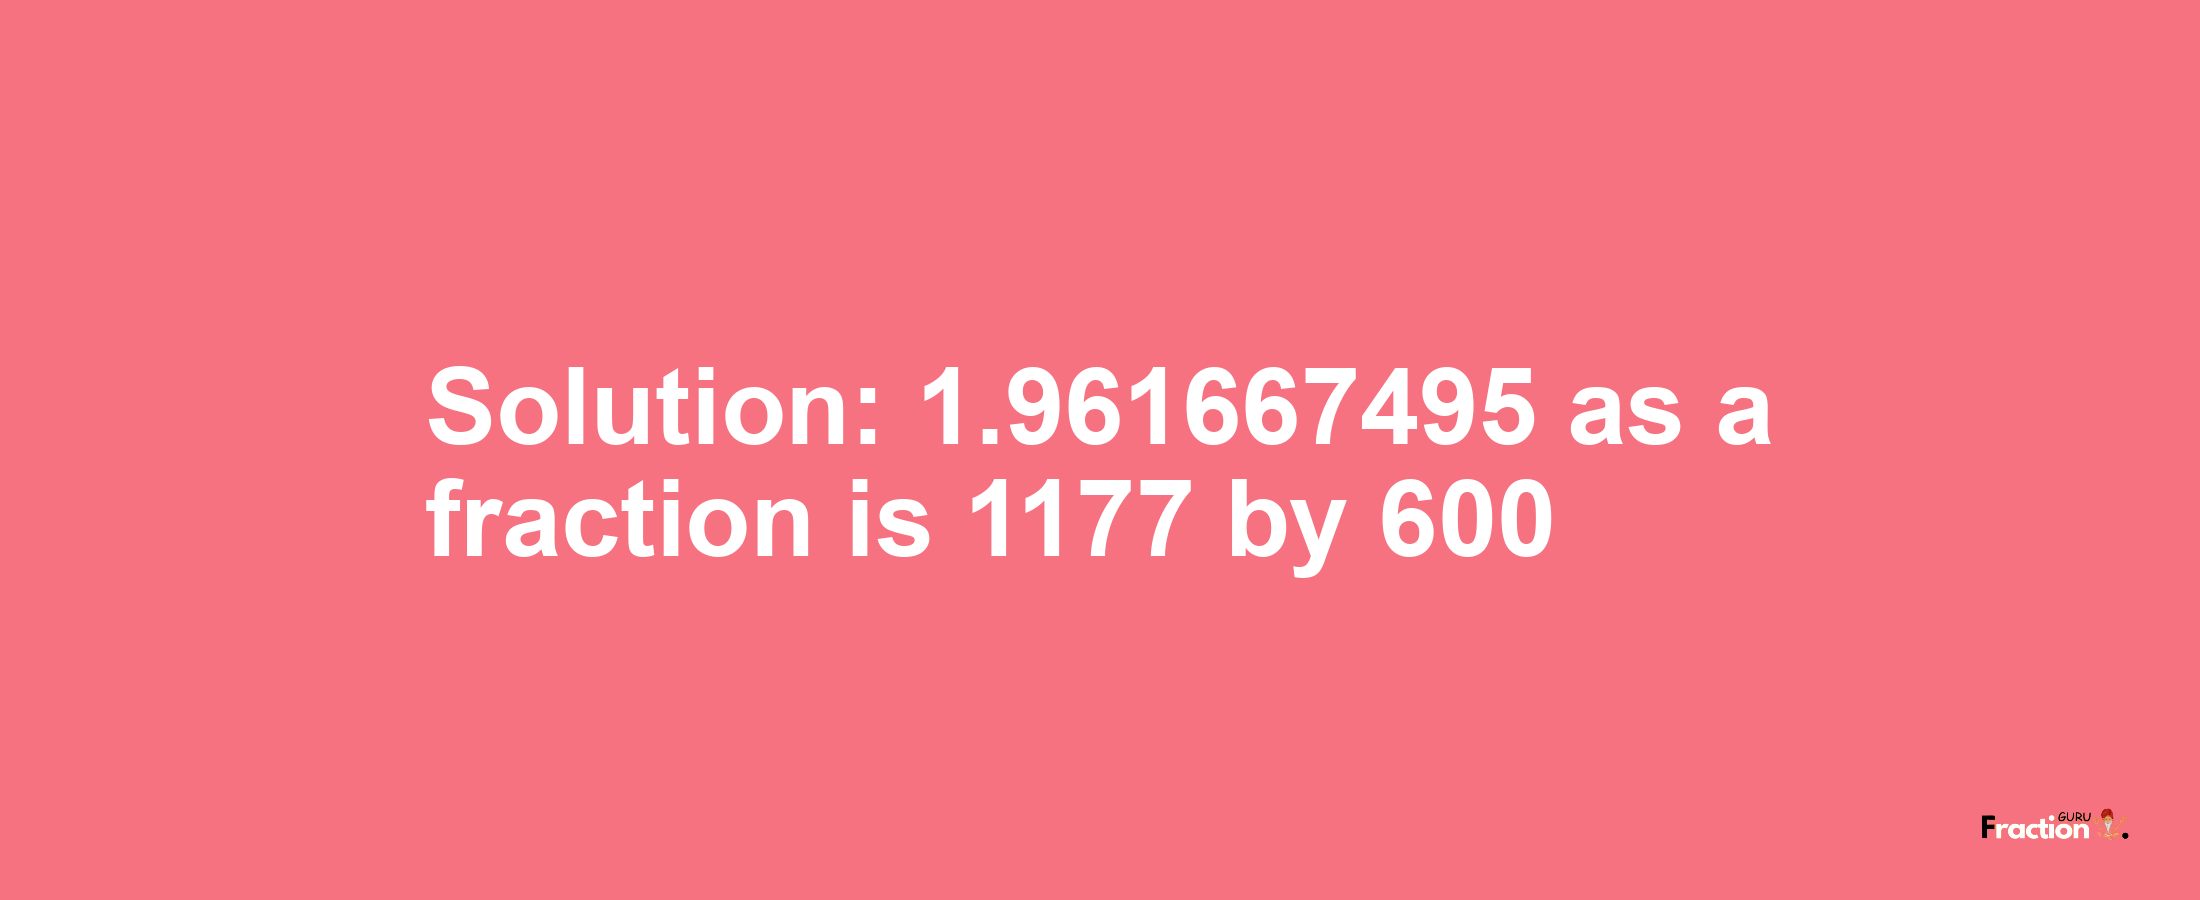 Solution:1.961667495 as a fraction is 1177/600